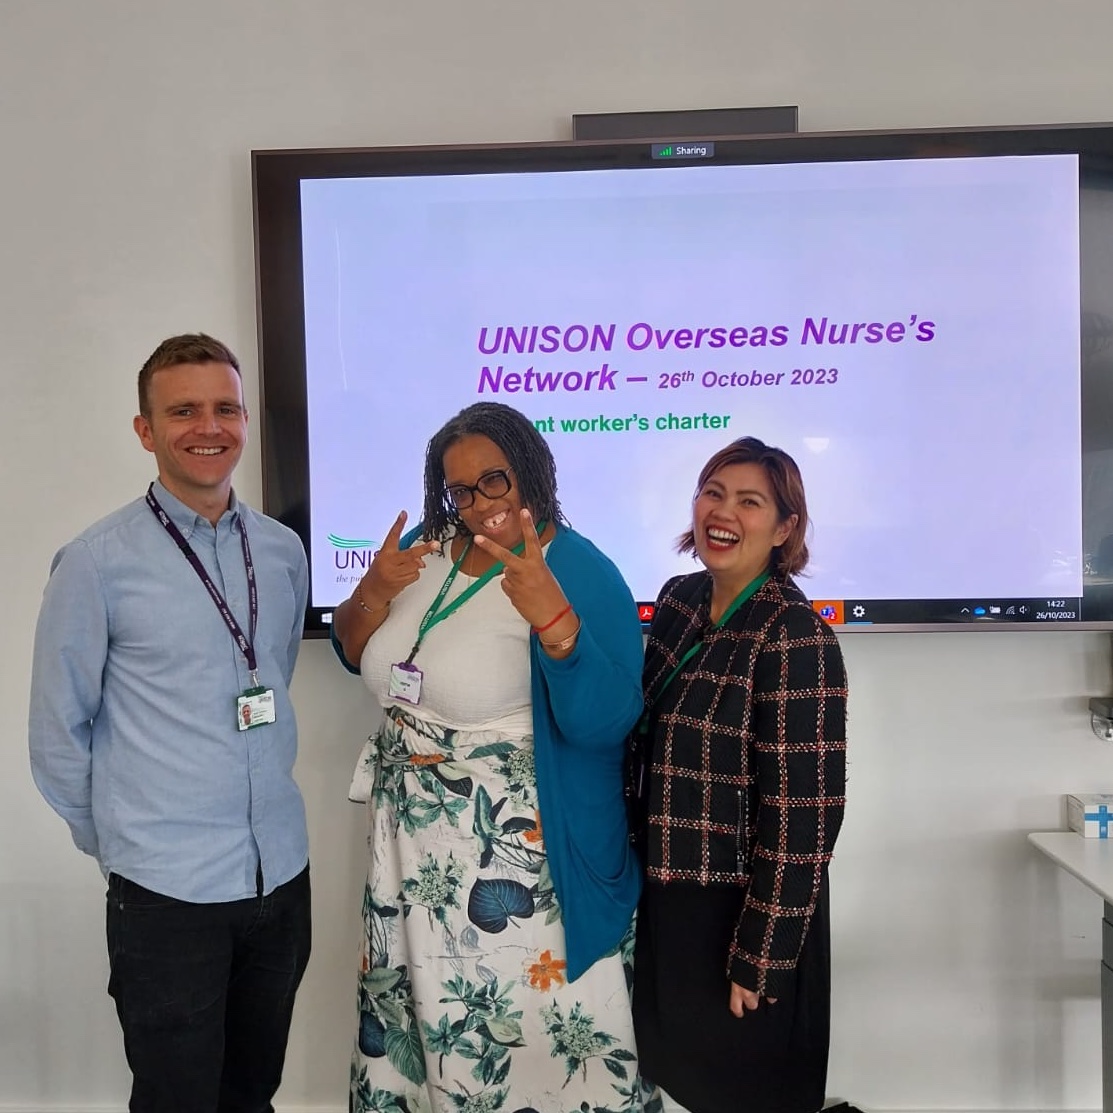 Excellent meeting of our UNISON overseas nurse’s network today in London - so much passion & important experience shared Thanks @gaa_nyasoro & @AprilMontoya_18 as ever for your leadership & dedication! Great to see you